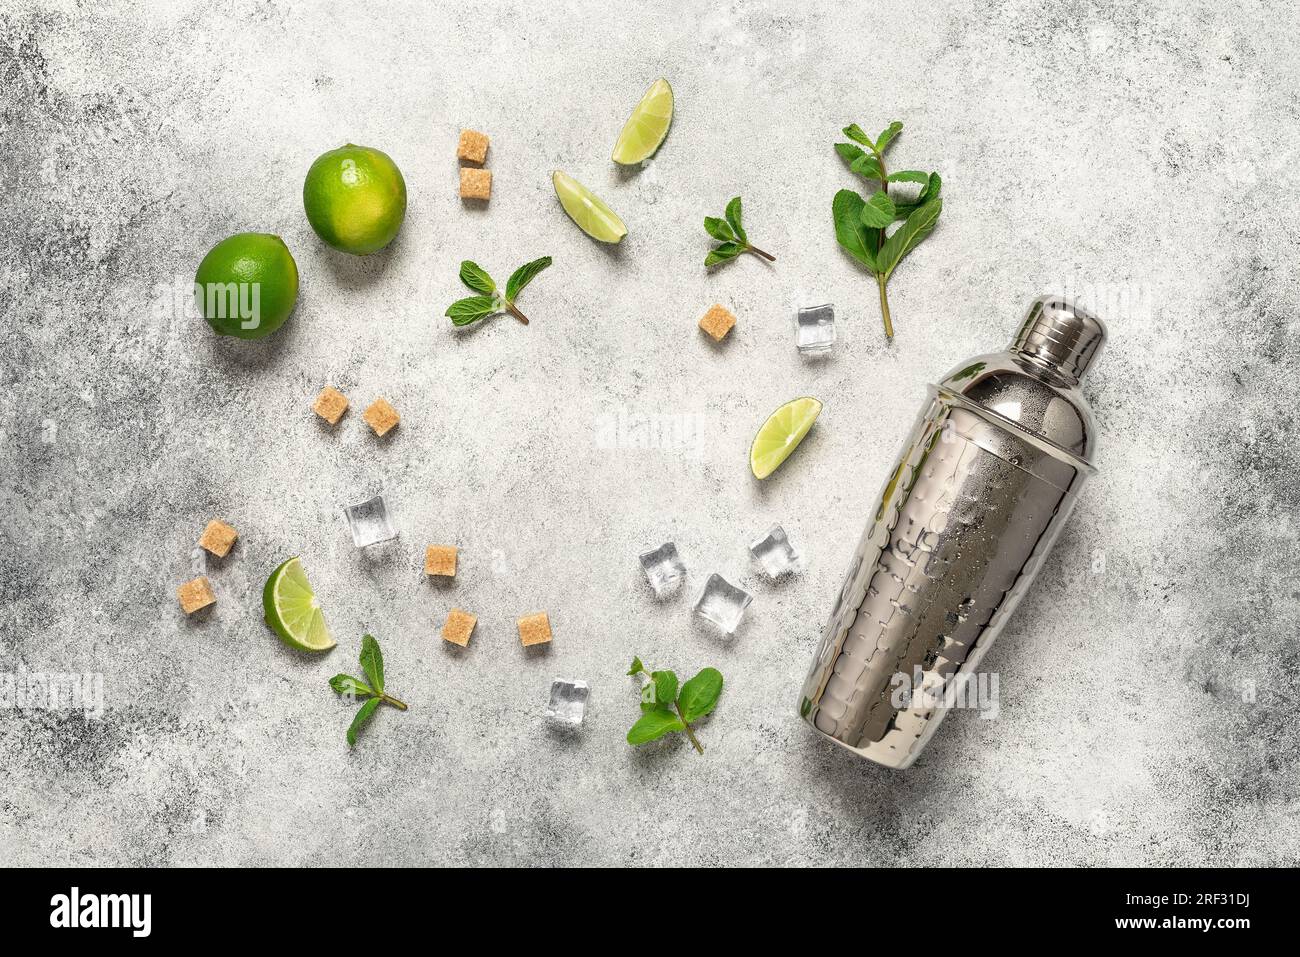 Ingredients for mojito frame, lime, mint leaves, shaker and cane sugar. Light gray vintage background. Top view, flat lay, copy space Stock Photo